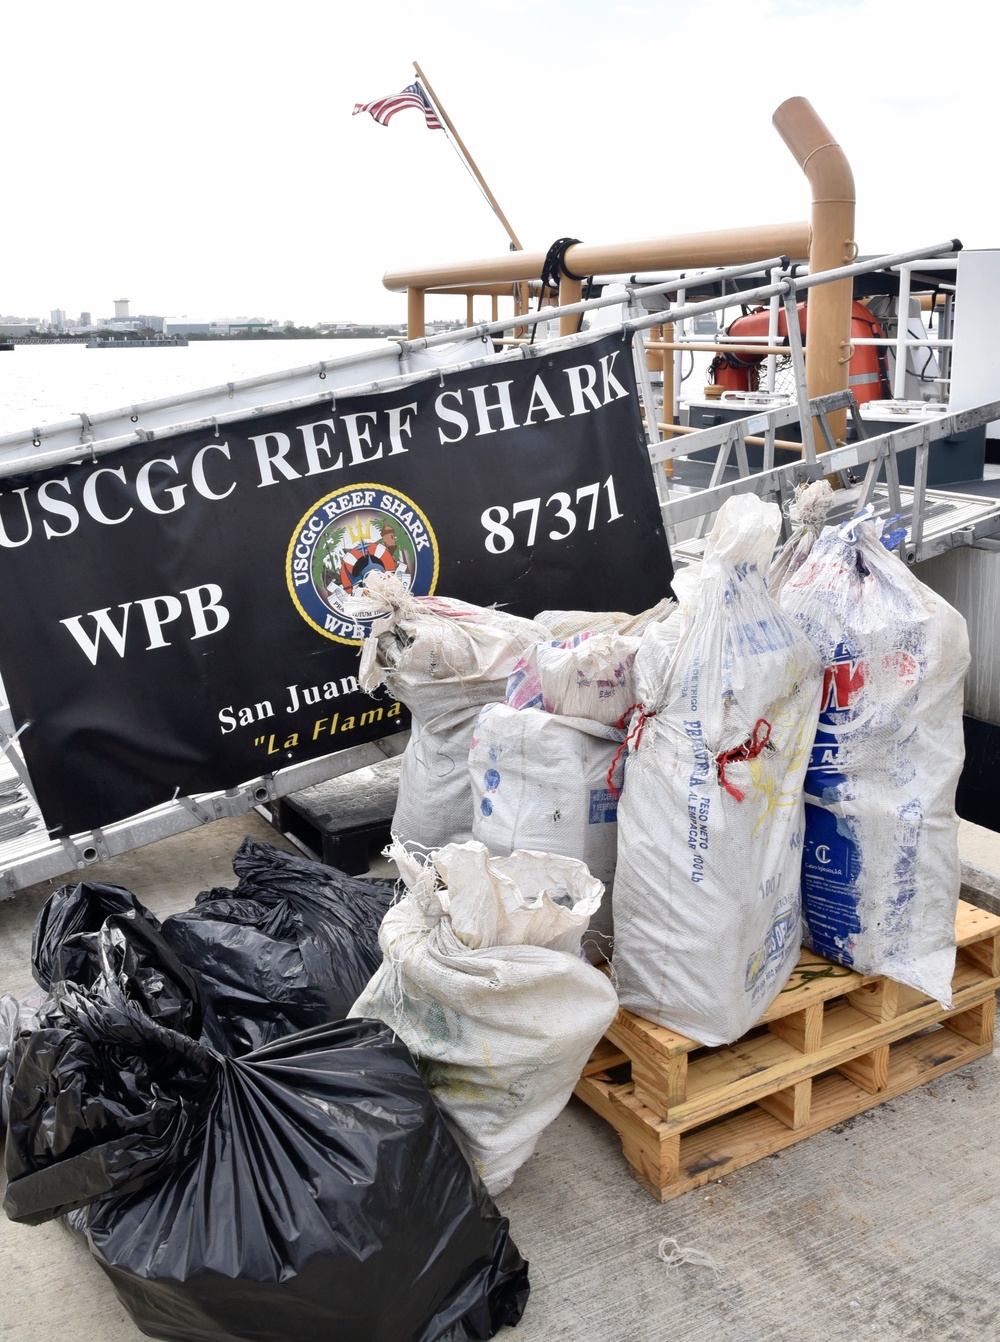 Coast Guard transfers 3 smugglers, over $6.6 million in seized cocaine to federal agents in Puerto Rico, following interdiction near Mona Island, Puerto Rico